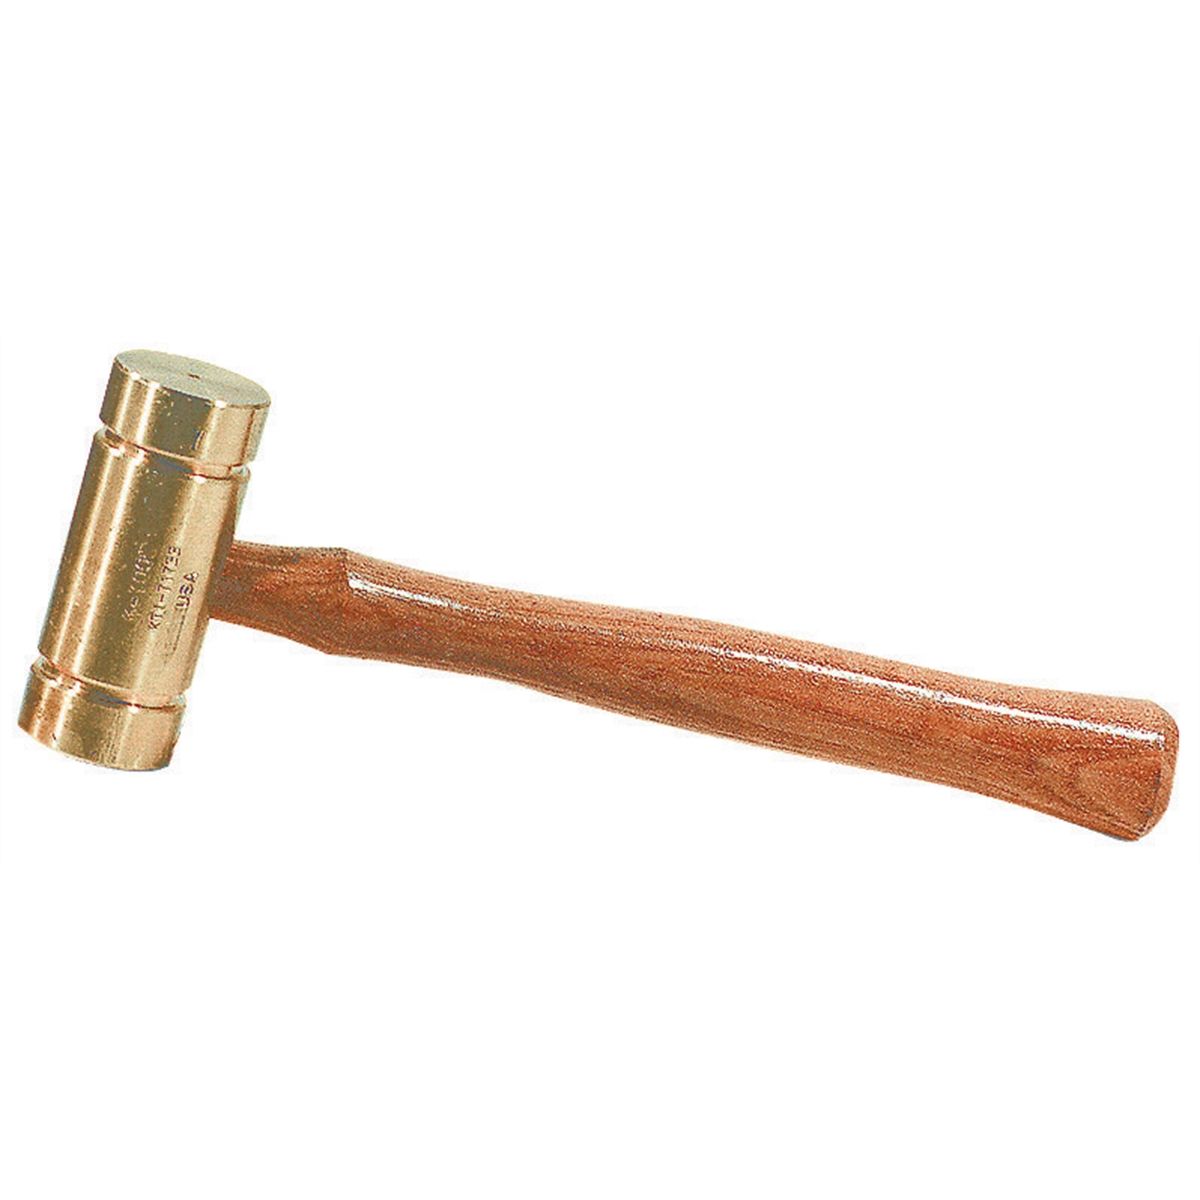 K Tool 71782 Brass Hammer 27 Oz Head and Handle are Solid Brass 